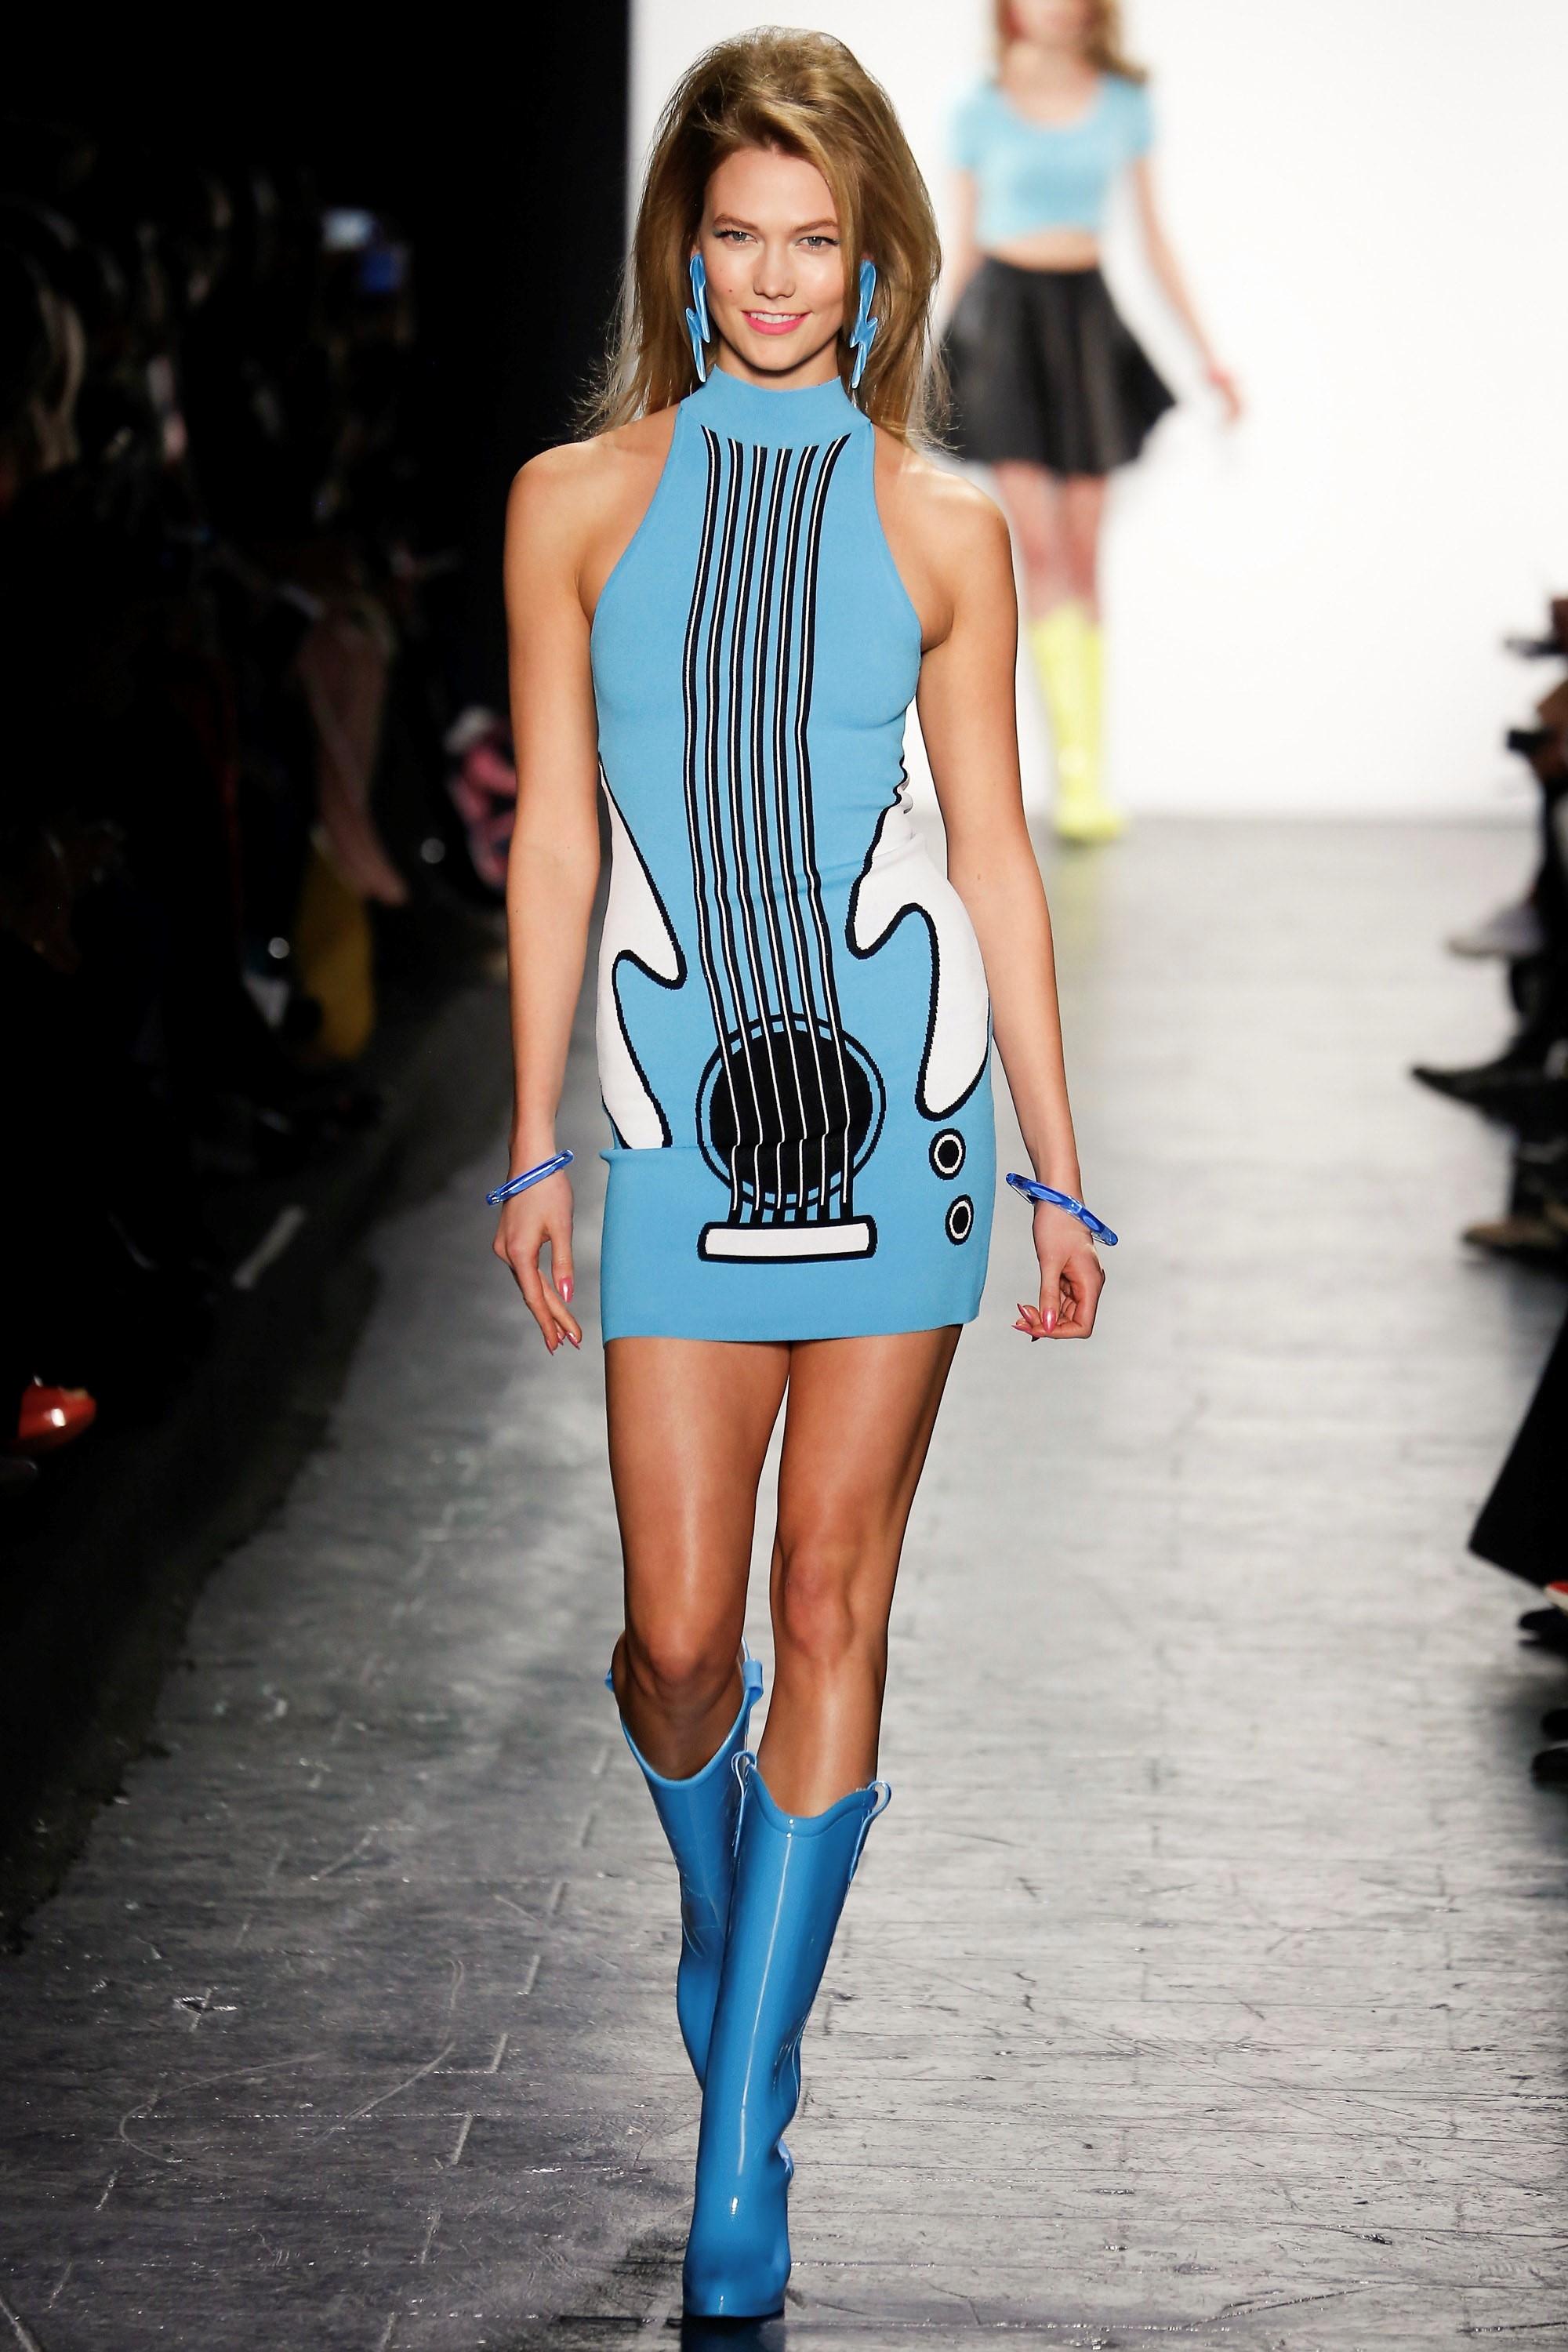 Brand New
Moschino's Jeremy Scott Famous Blue Guitar Dress
Italian Size 42 Bodycon With Plenty of Stretch Available
Runway F/W 2016
Seen on Katy Perry
$990

COMPOSITION
75% Rayon, 25% Polyamide
Made in Italy